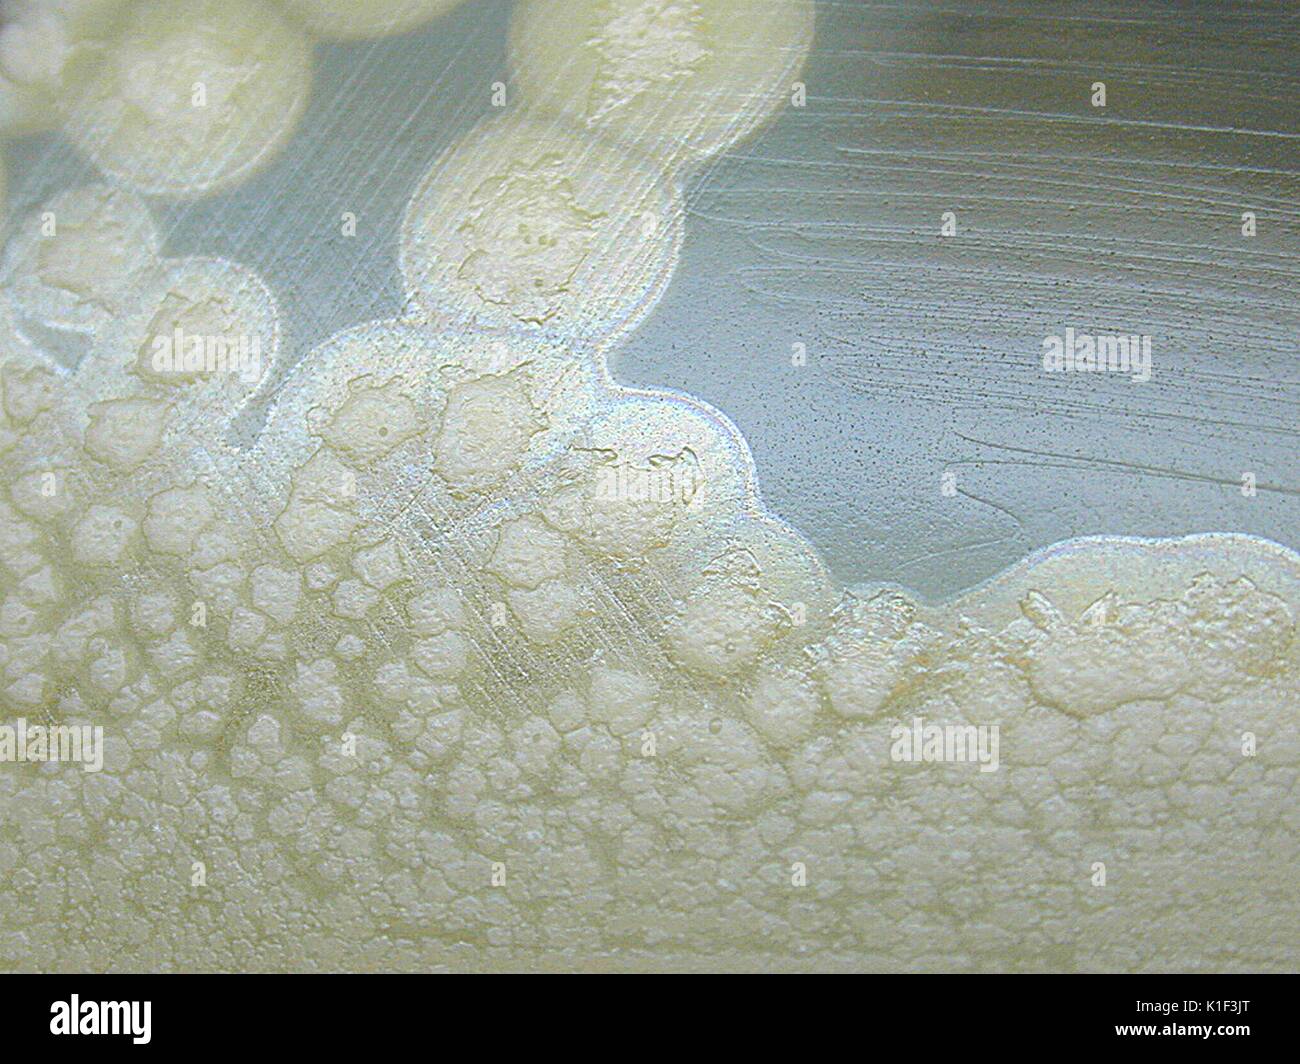 Clostridium botulinum growing on egg yolk agar showing the lipase reaction after 72 hours of incubation. C. botulinum is a strictly anaerobic bacterium that when grown on egg yolk agar, its colonies will exhibit a lipase reaction, described as the shiny area around each colony. Image courtesy CDC/Courtesy of Larry Stauffer, Oregon State Public Health Laboratory, 2002. Stock Photo